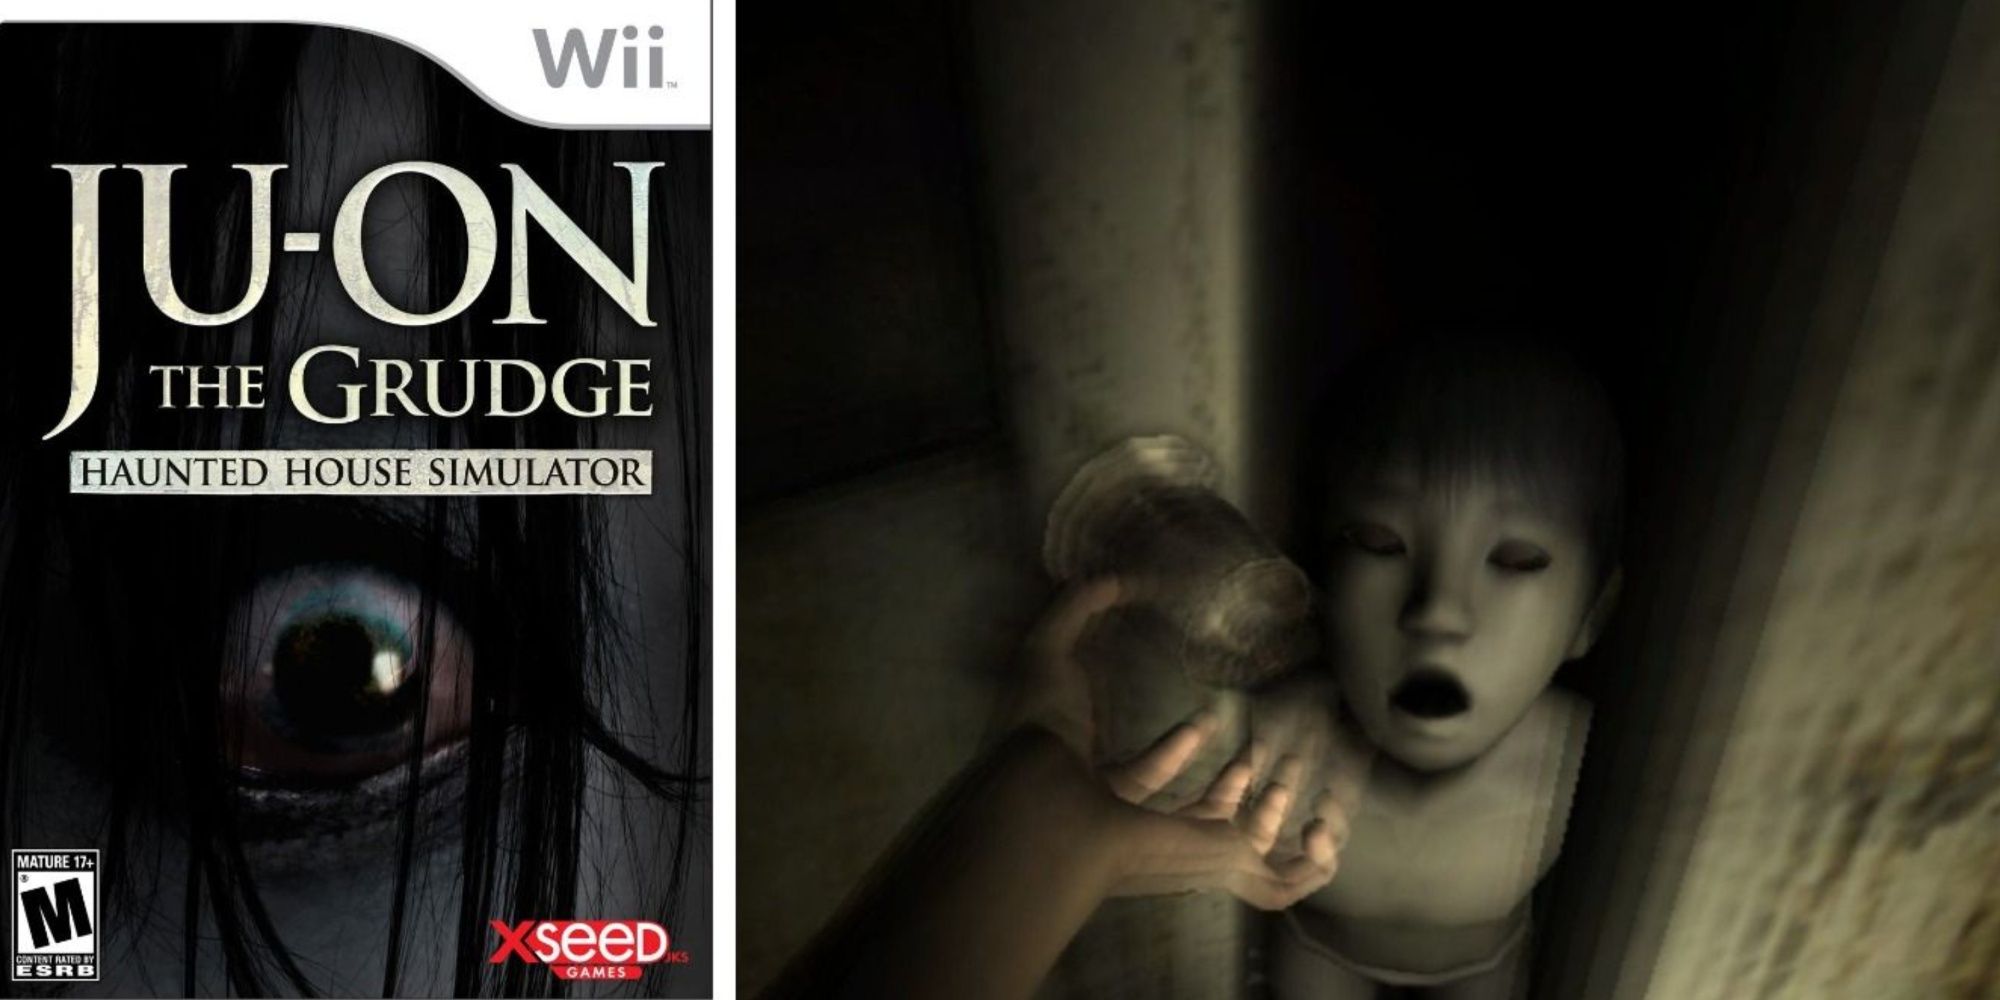 A split-image of the Wii artwork for Ju-On The Grudge and a close-up of the main character opening a door to be jump-scared by a spirit.